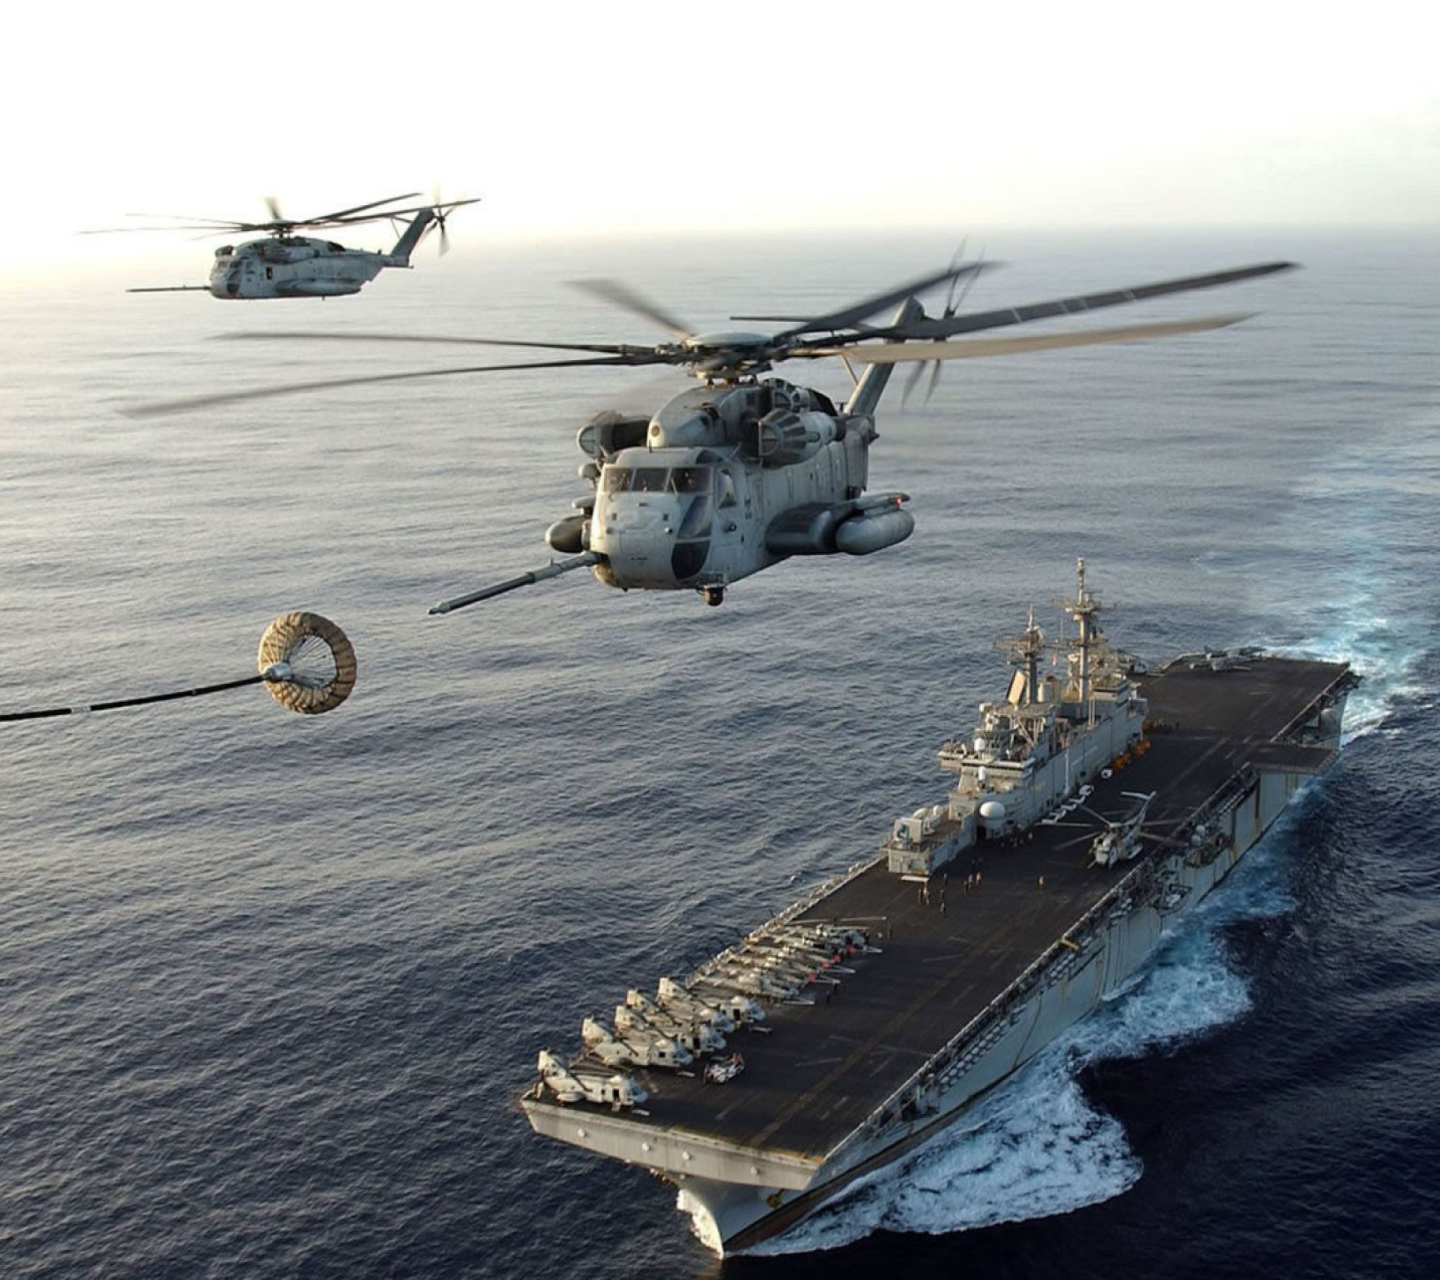 Das Aircraft Carrier And Helicopter Wallpaper 1440x1280